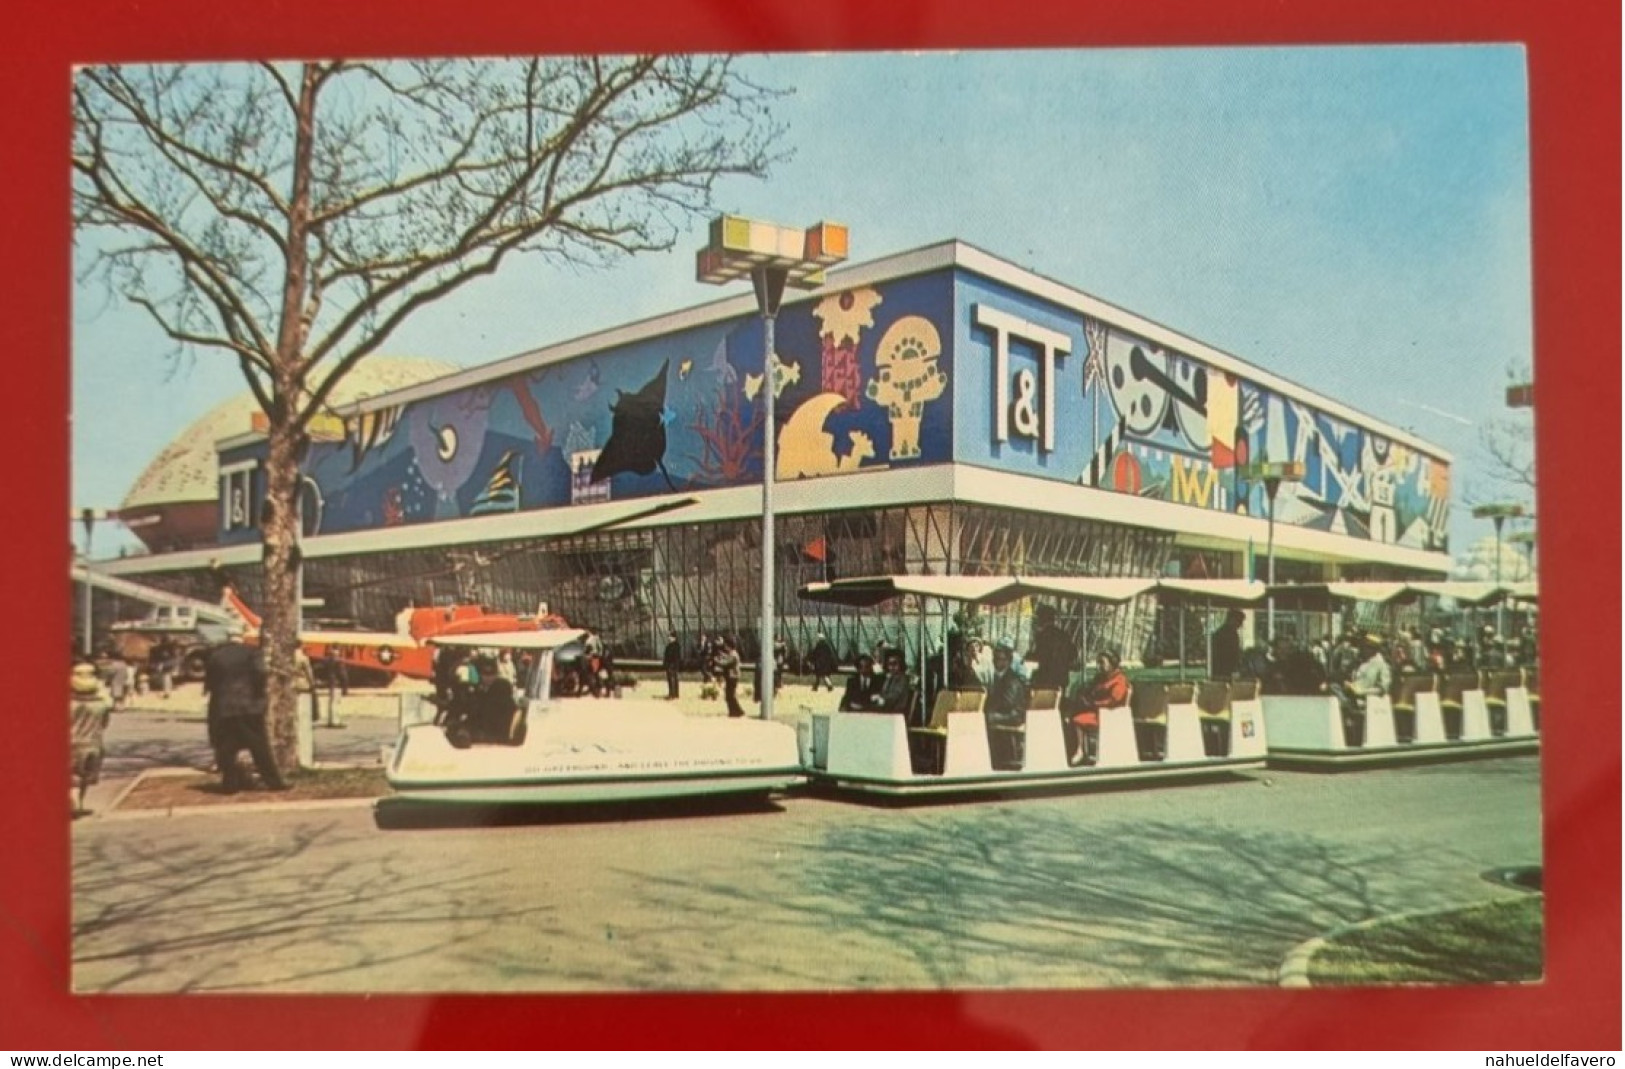 Uncirculated Postcard - USA - NY, NEW YORK WORLD'S FAIR 1964-65 - TRANSPORTATION AND TRAVEL PAVILION - Exhibitions